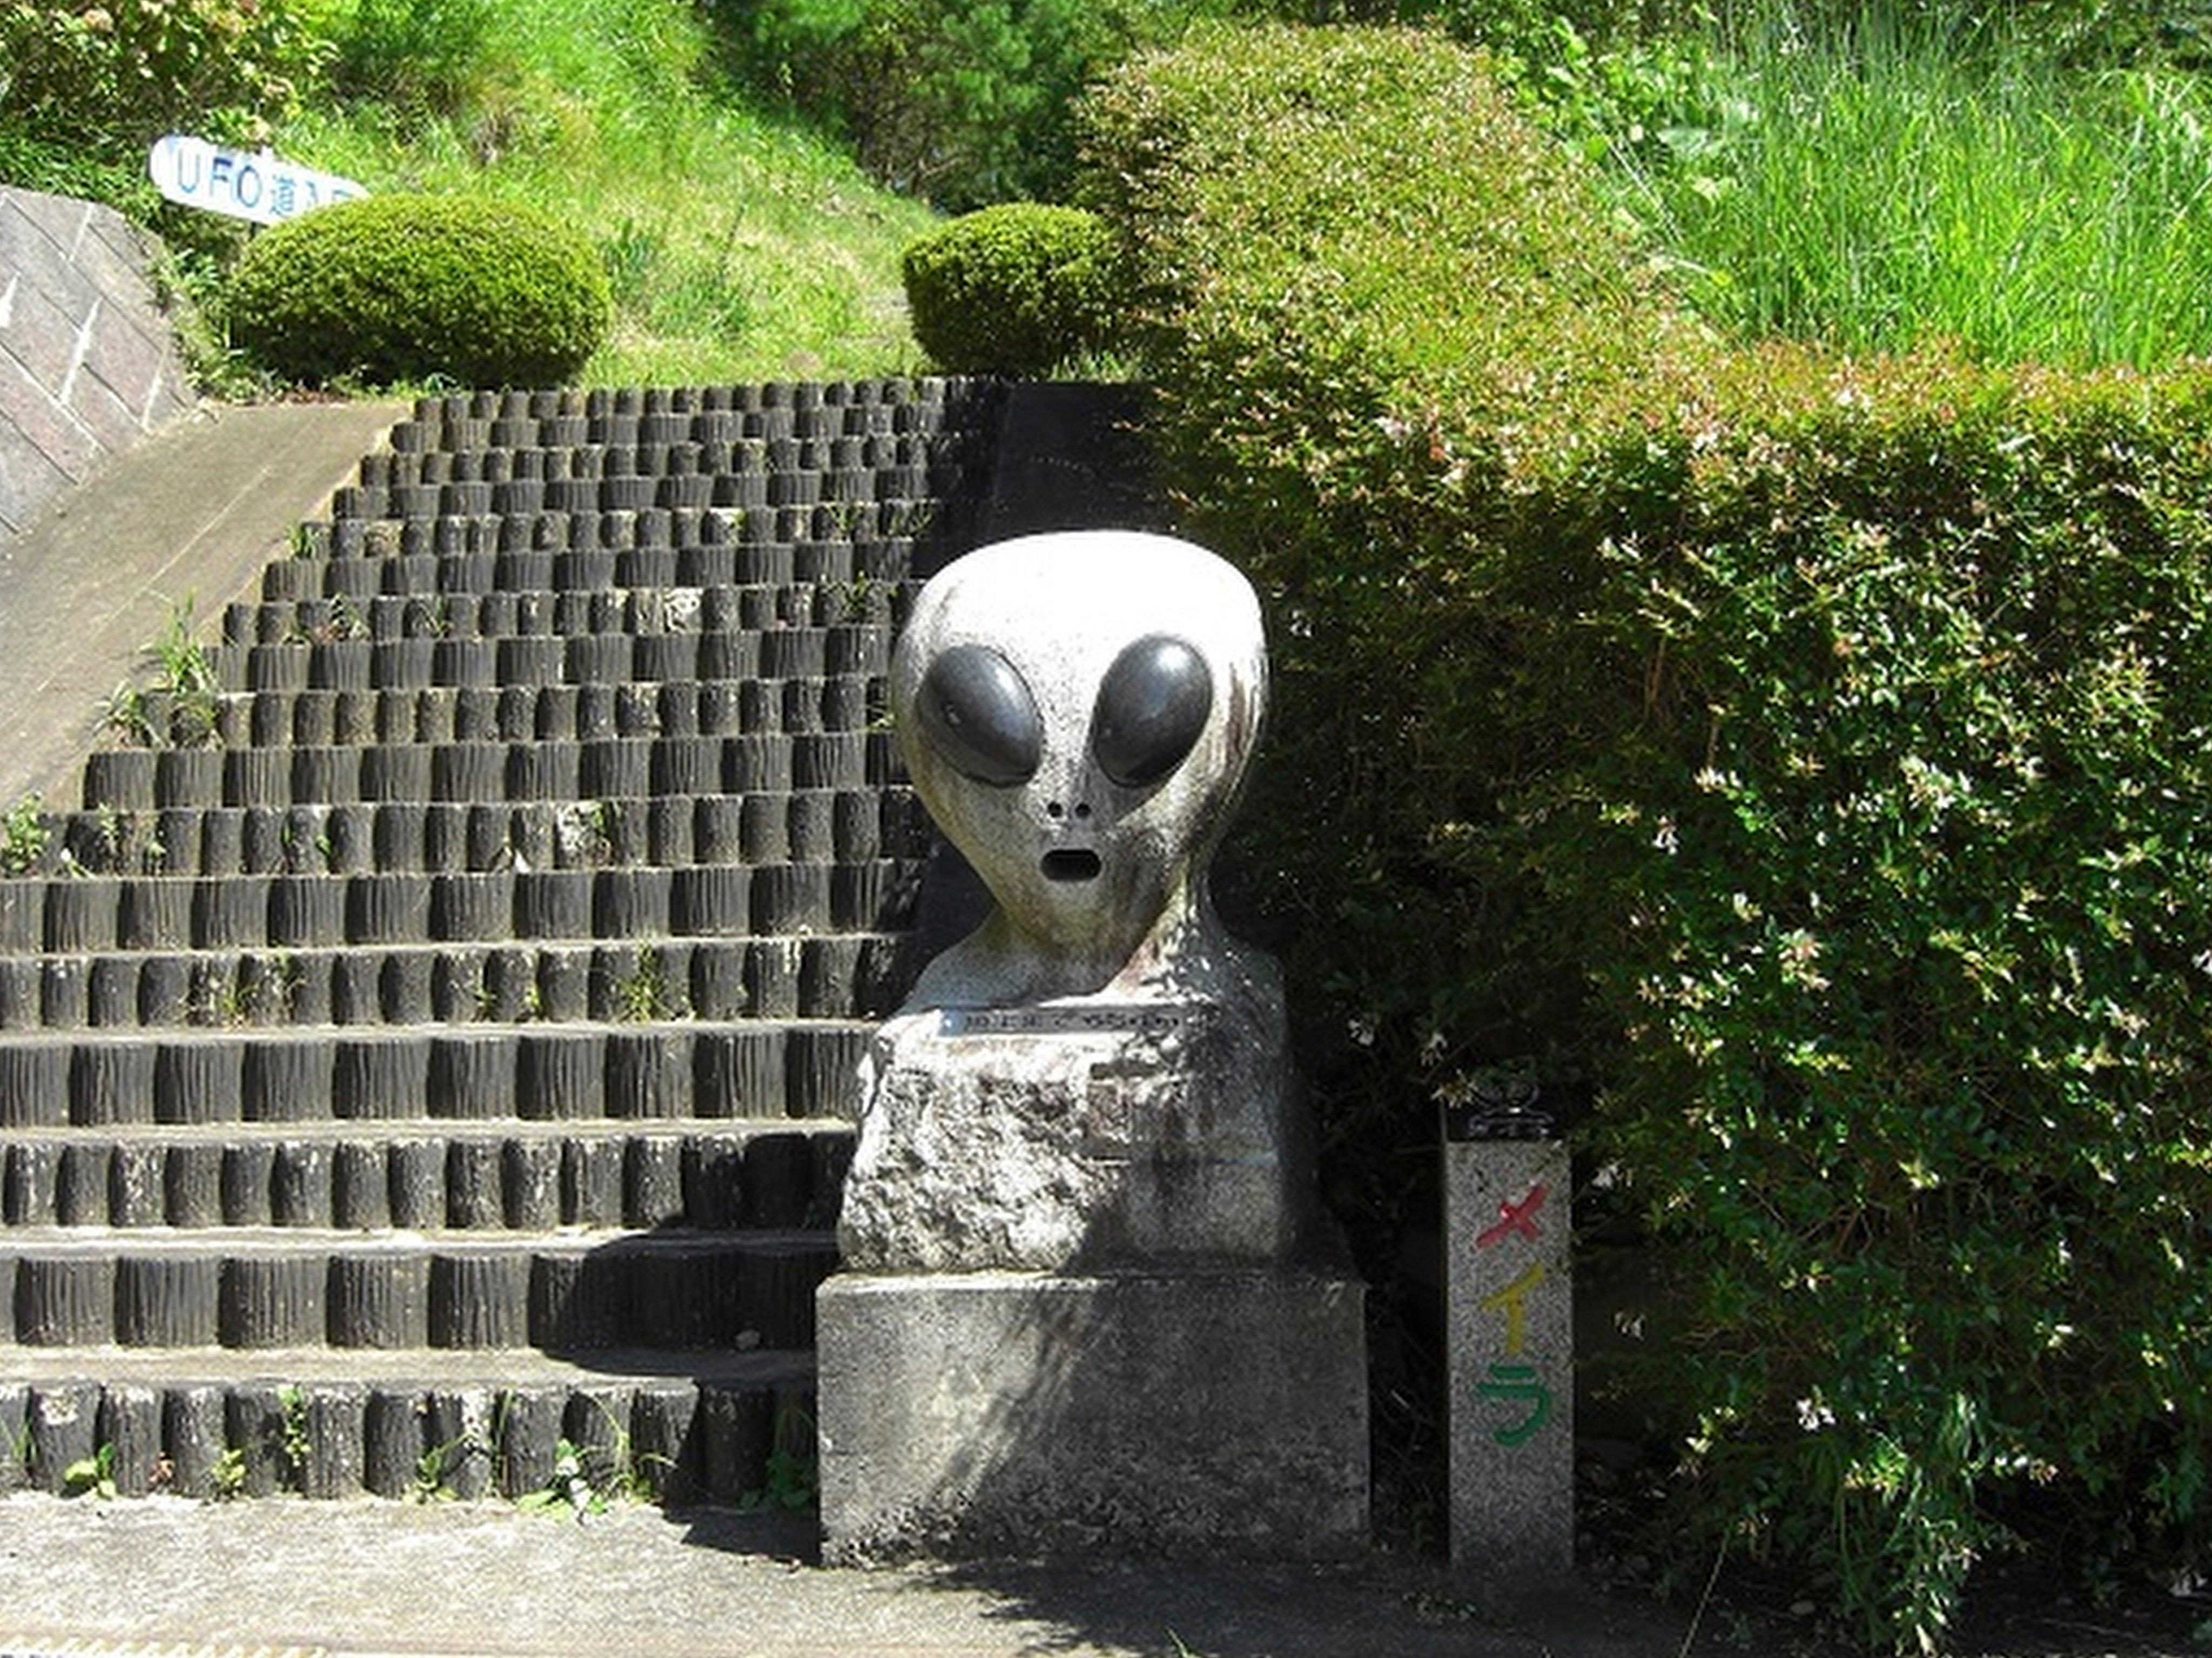 A statue resembling an alien in Iinomachi district in Fukushima. Japan has a reputation of being a hotbed of UFO sightings. Photo: X/info_ufo